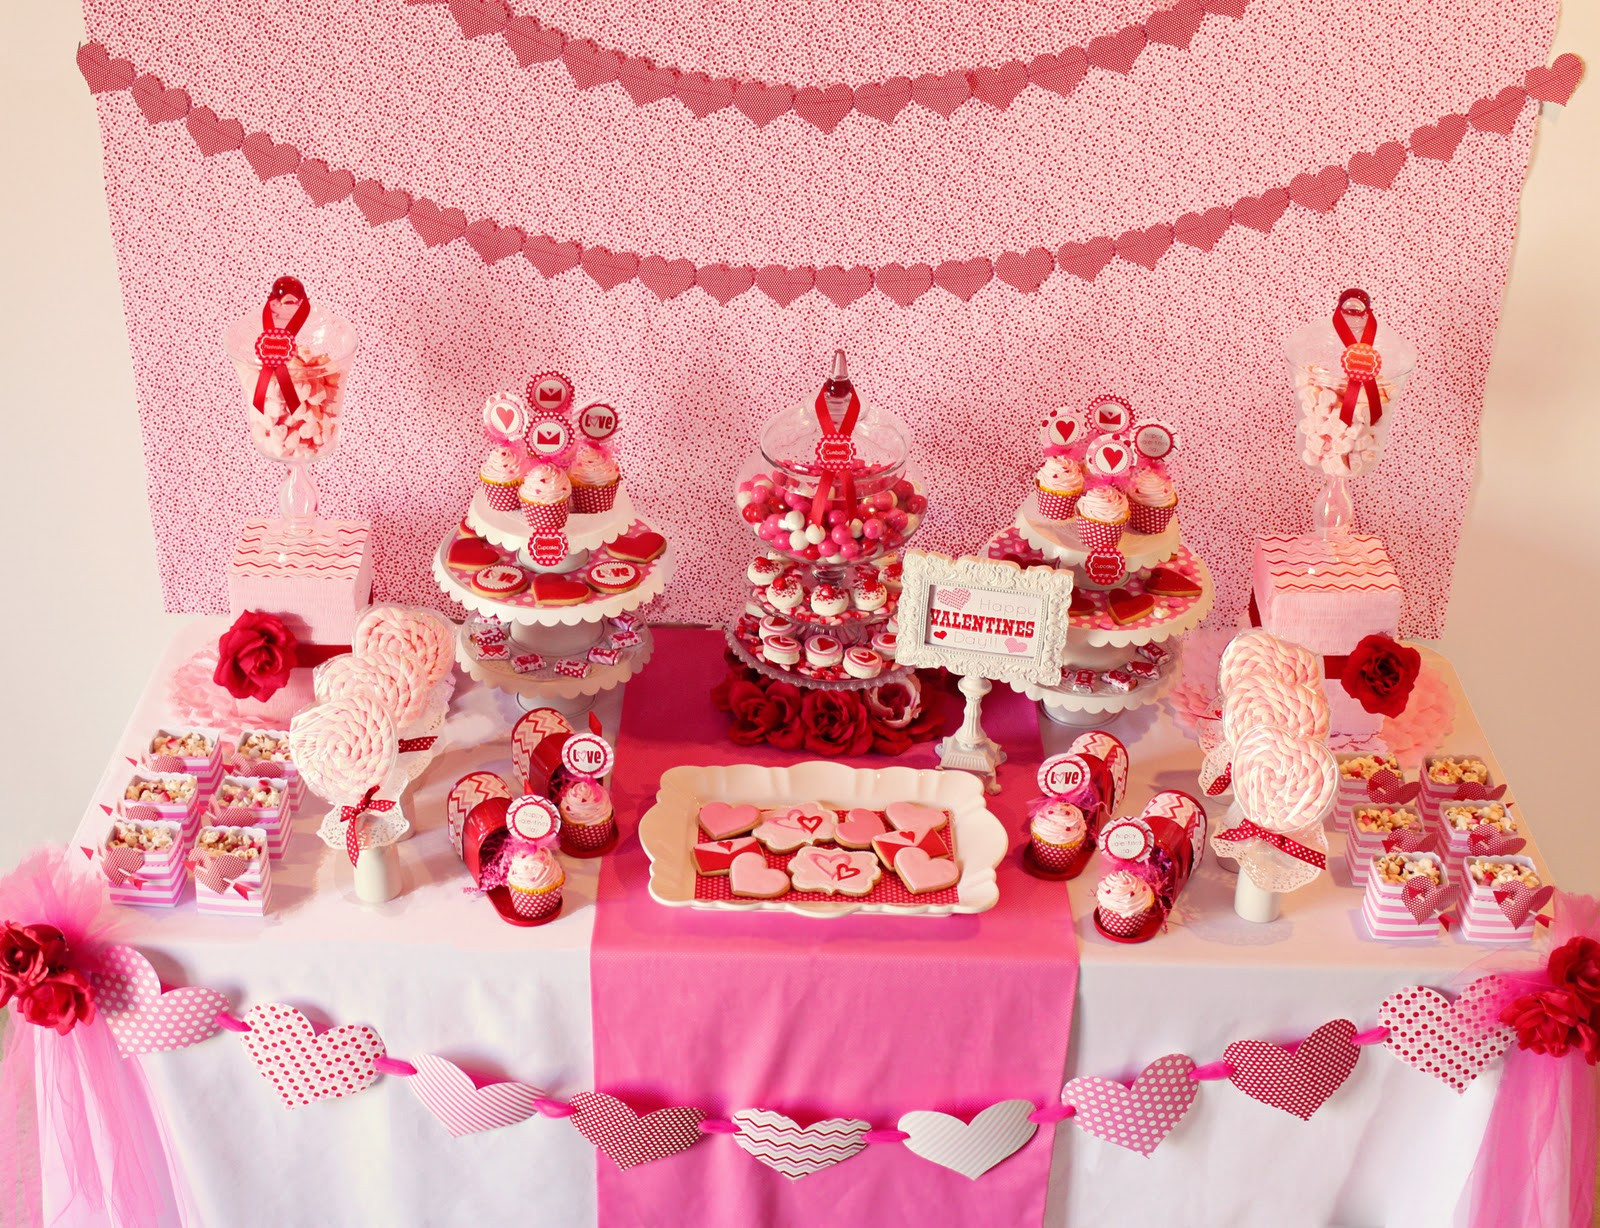 Valentines Day Party Supplies
 Amanda s Parties To Go Valentines Party Table Ideas